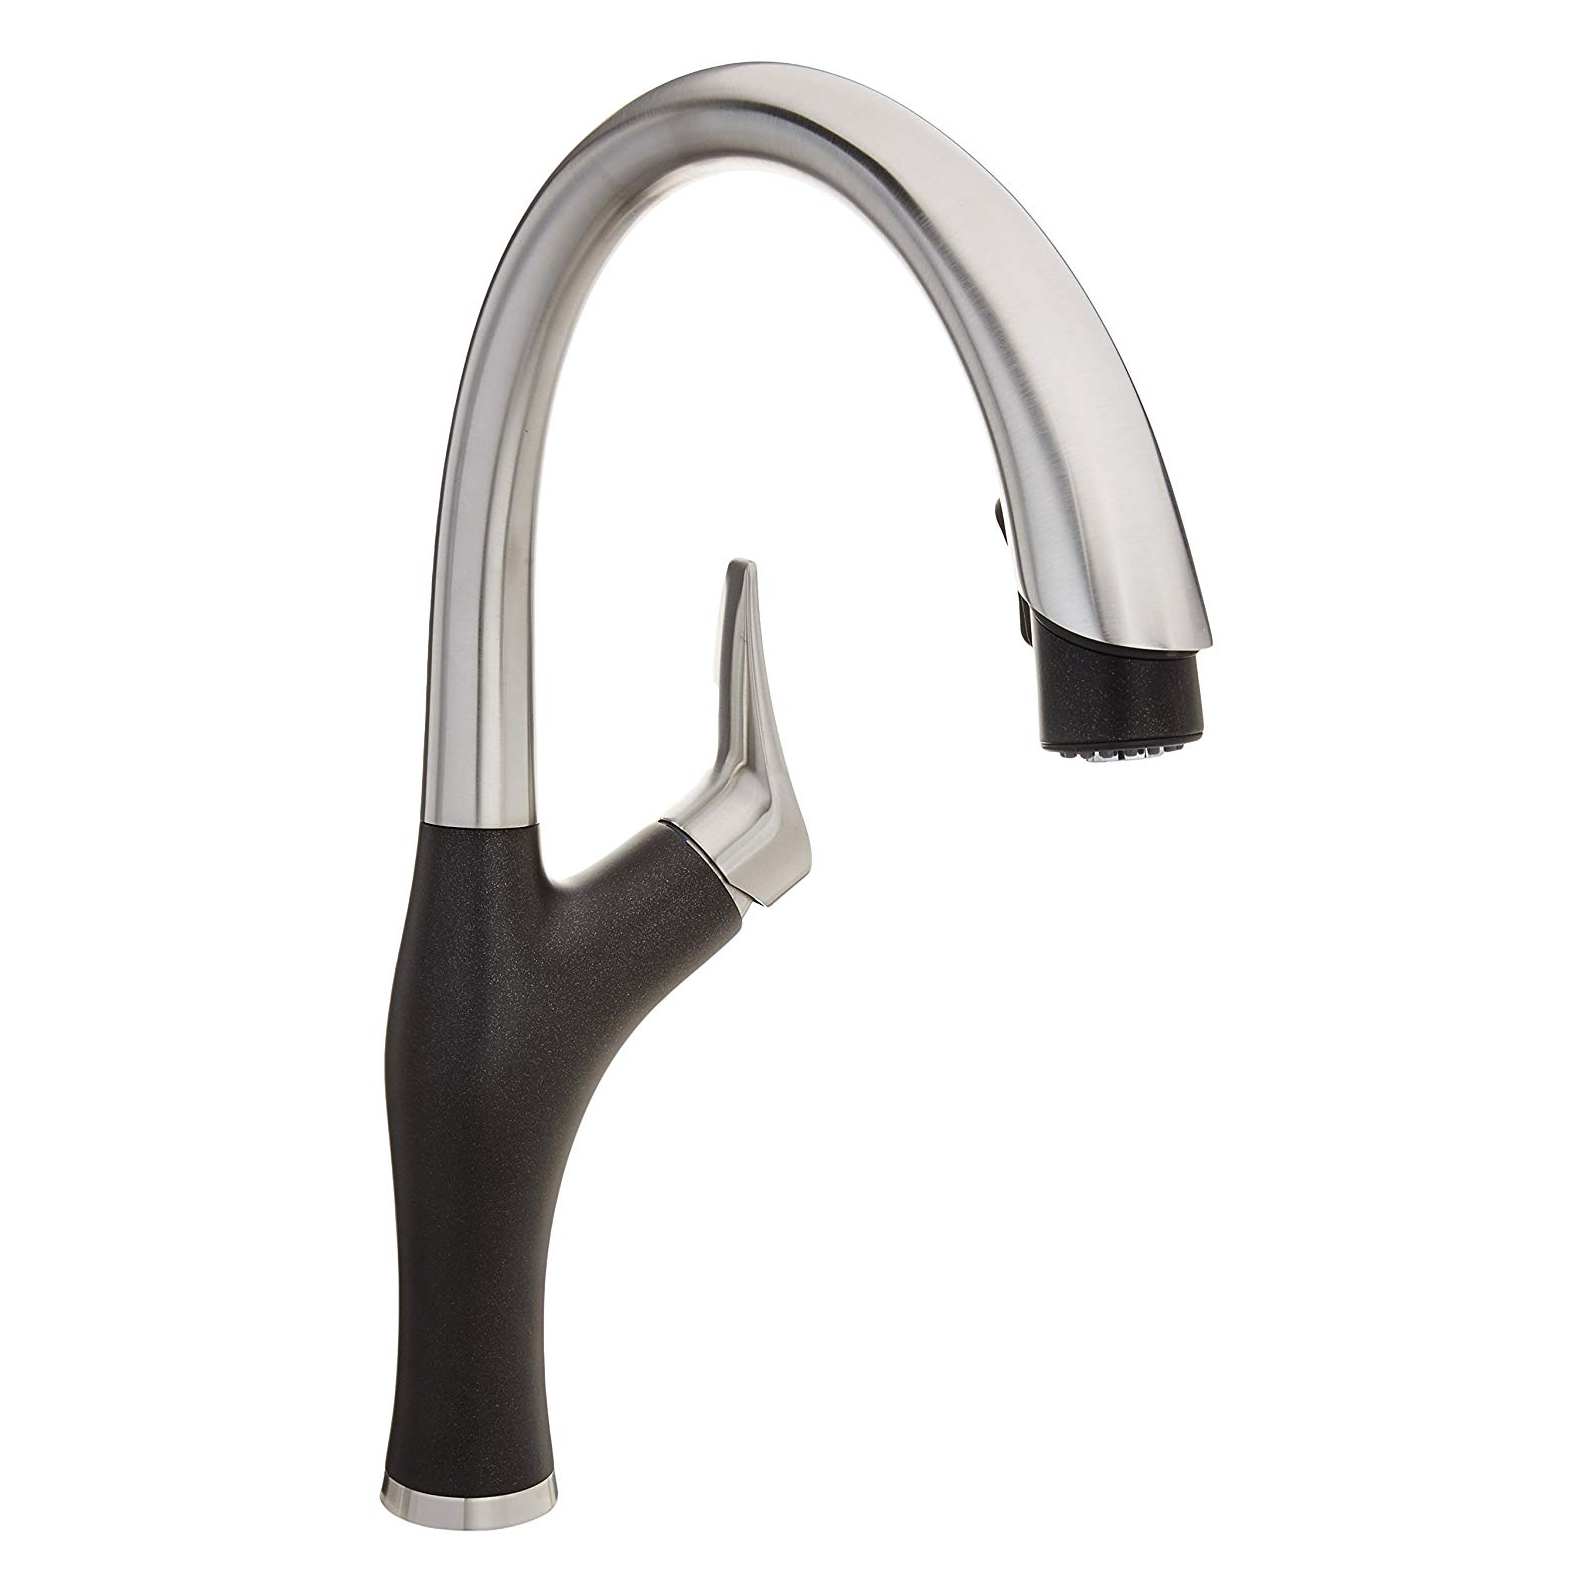 Artona Single Hole Pull-Down Fct in Anthracite/Stainless